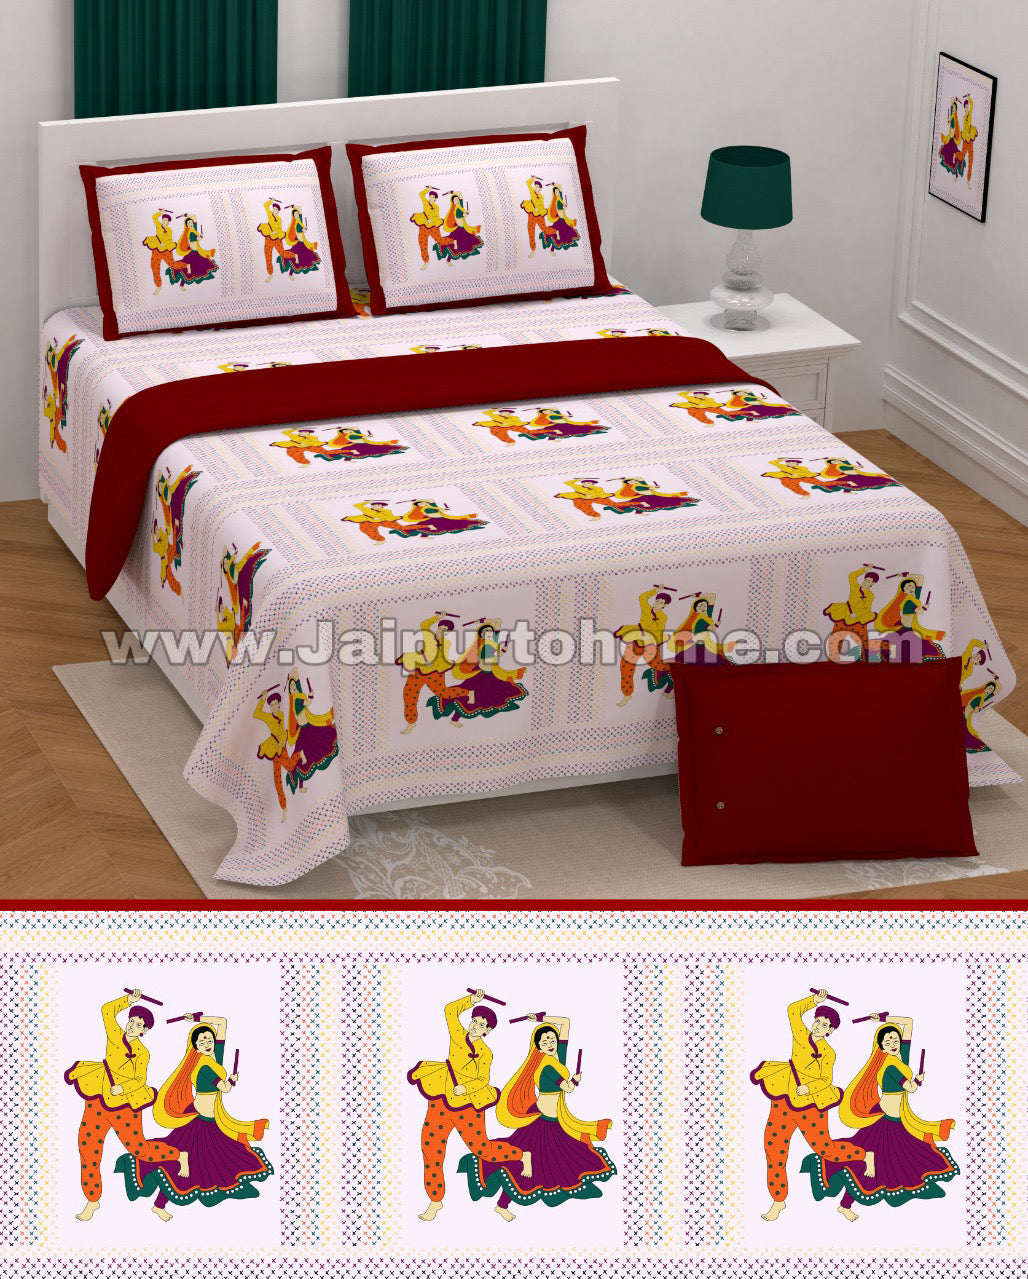 Alllemo Brand Maroon Bedsheet 108 x 108 100% Cotton Traditional Jaipuri Print 1 King Bedsheet with 2 Pillow Covers Alllemo